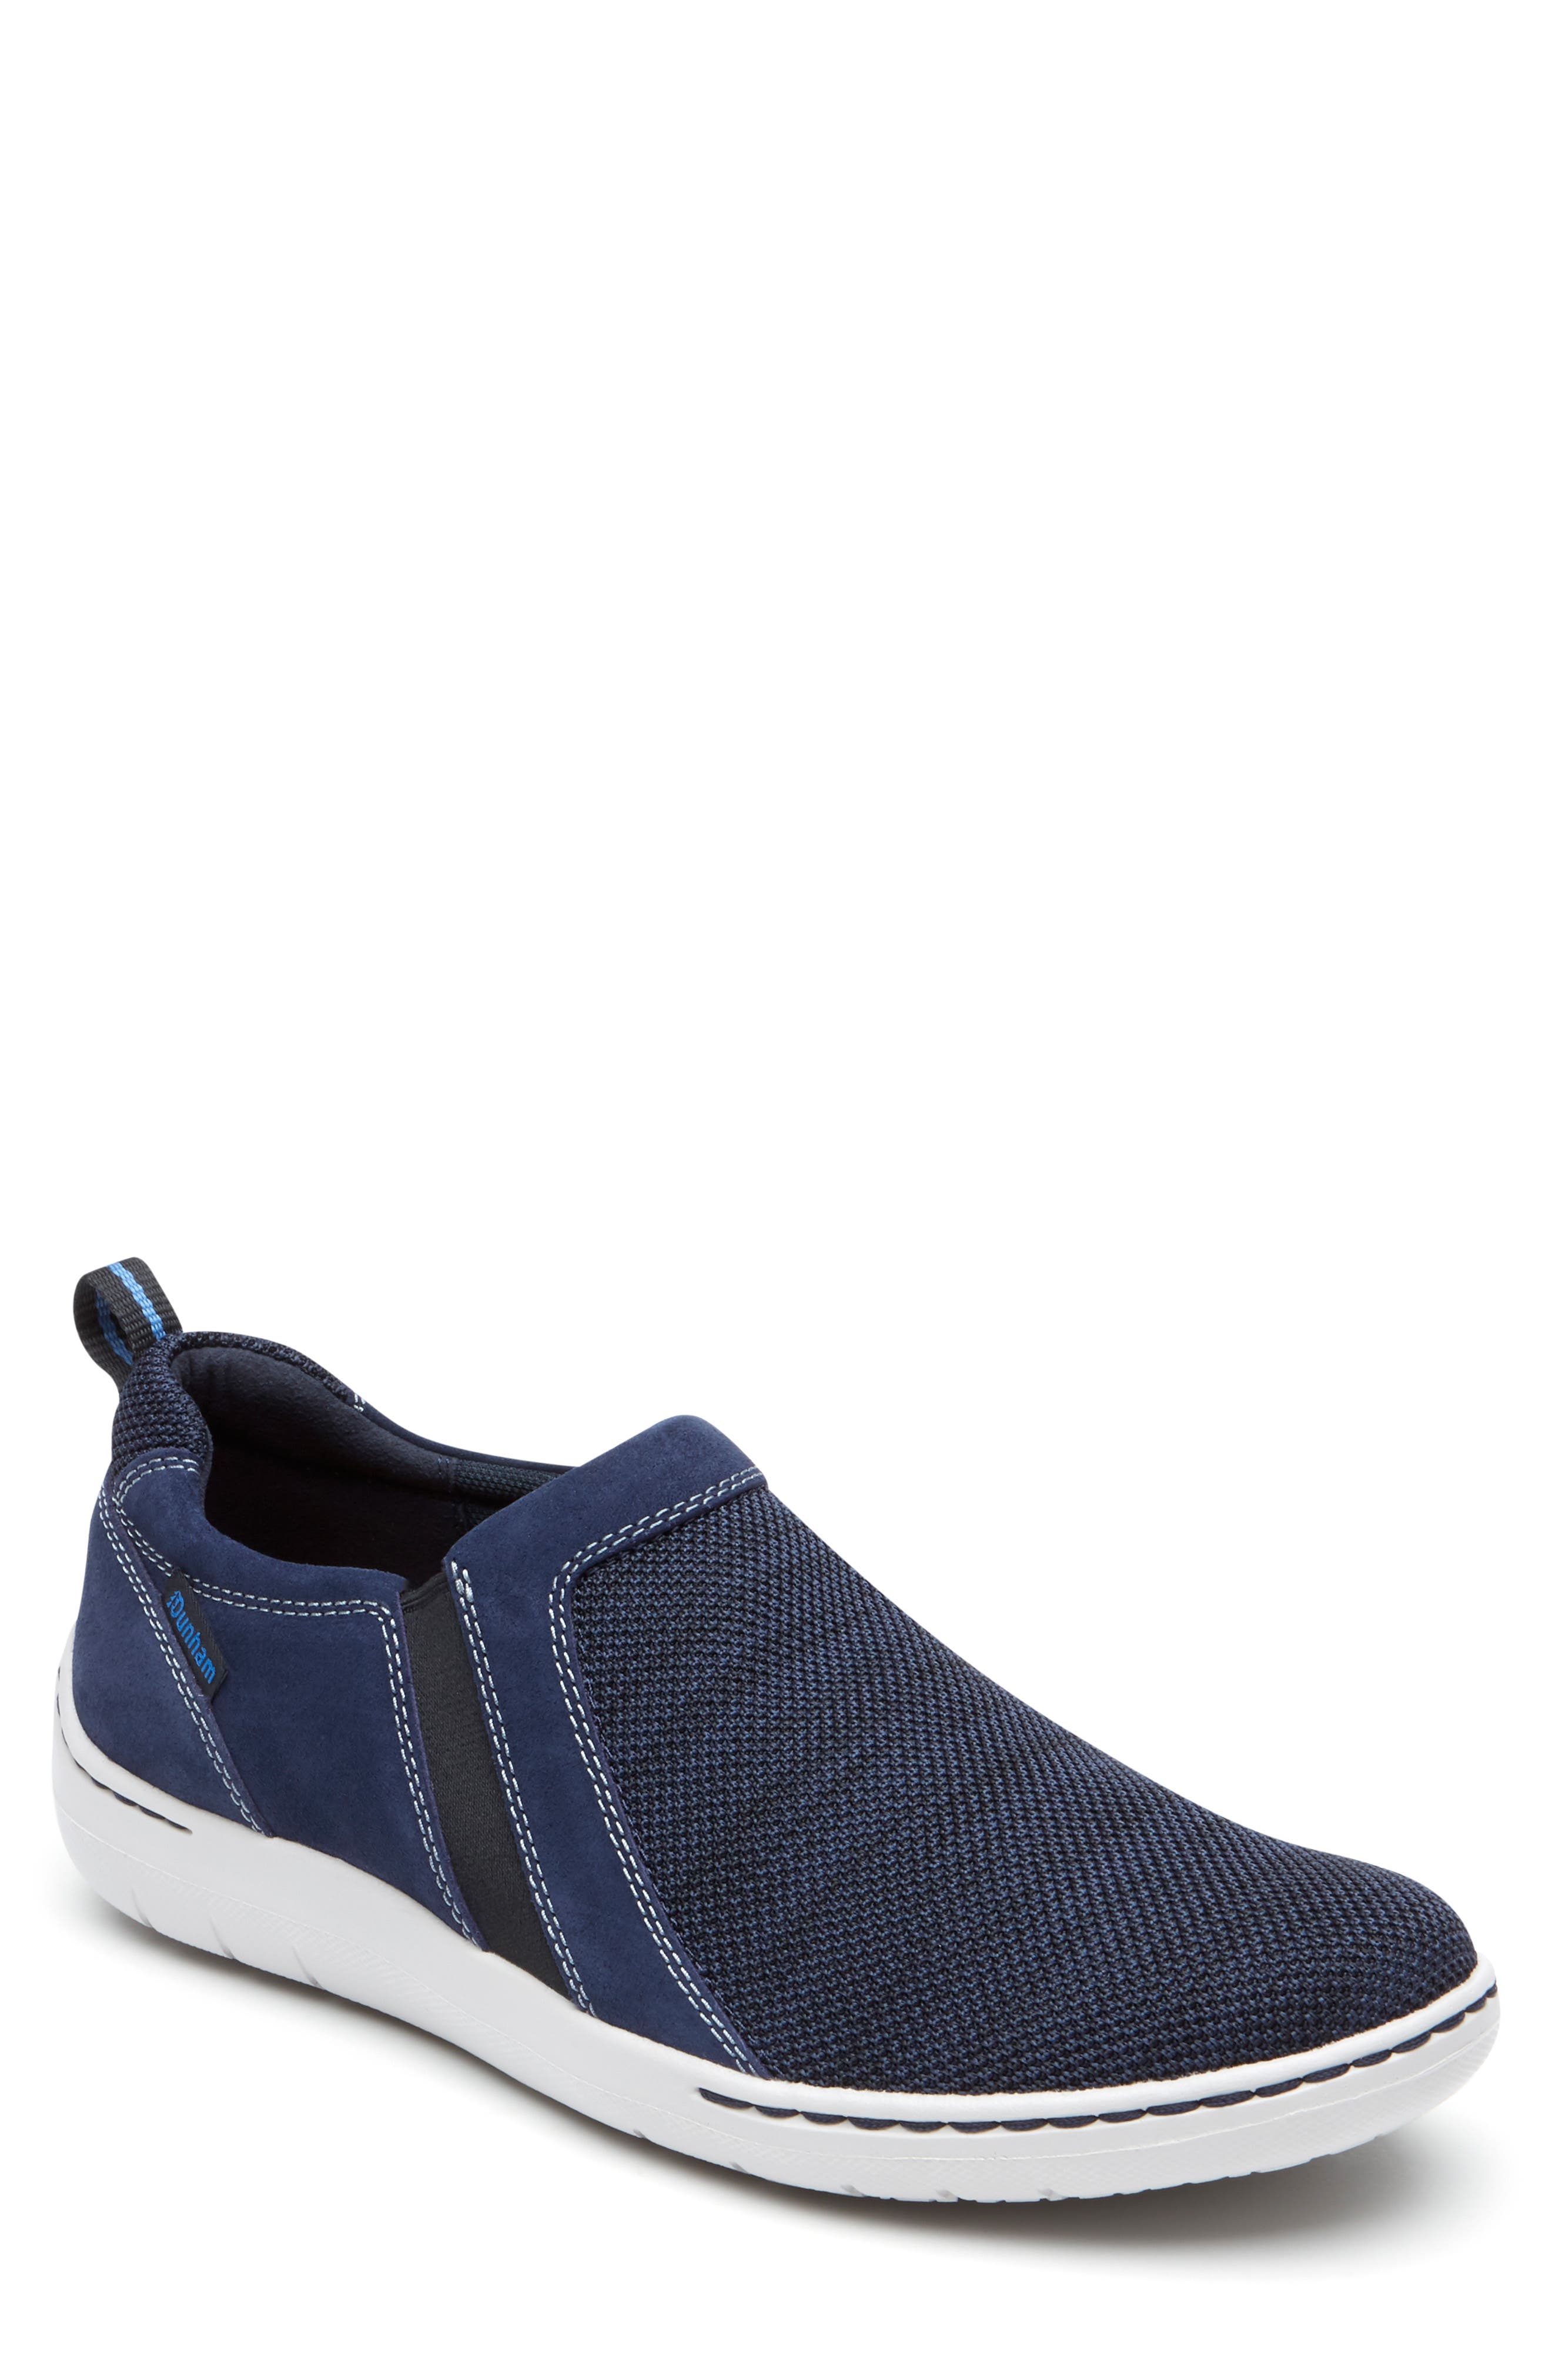 Dunham - Men's Casual Fashion Shoes and Sneakers